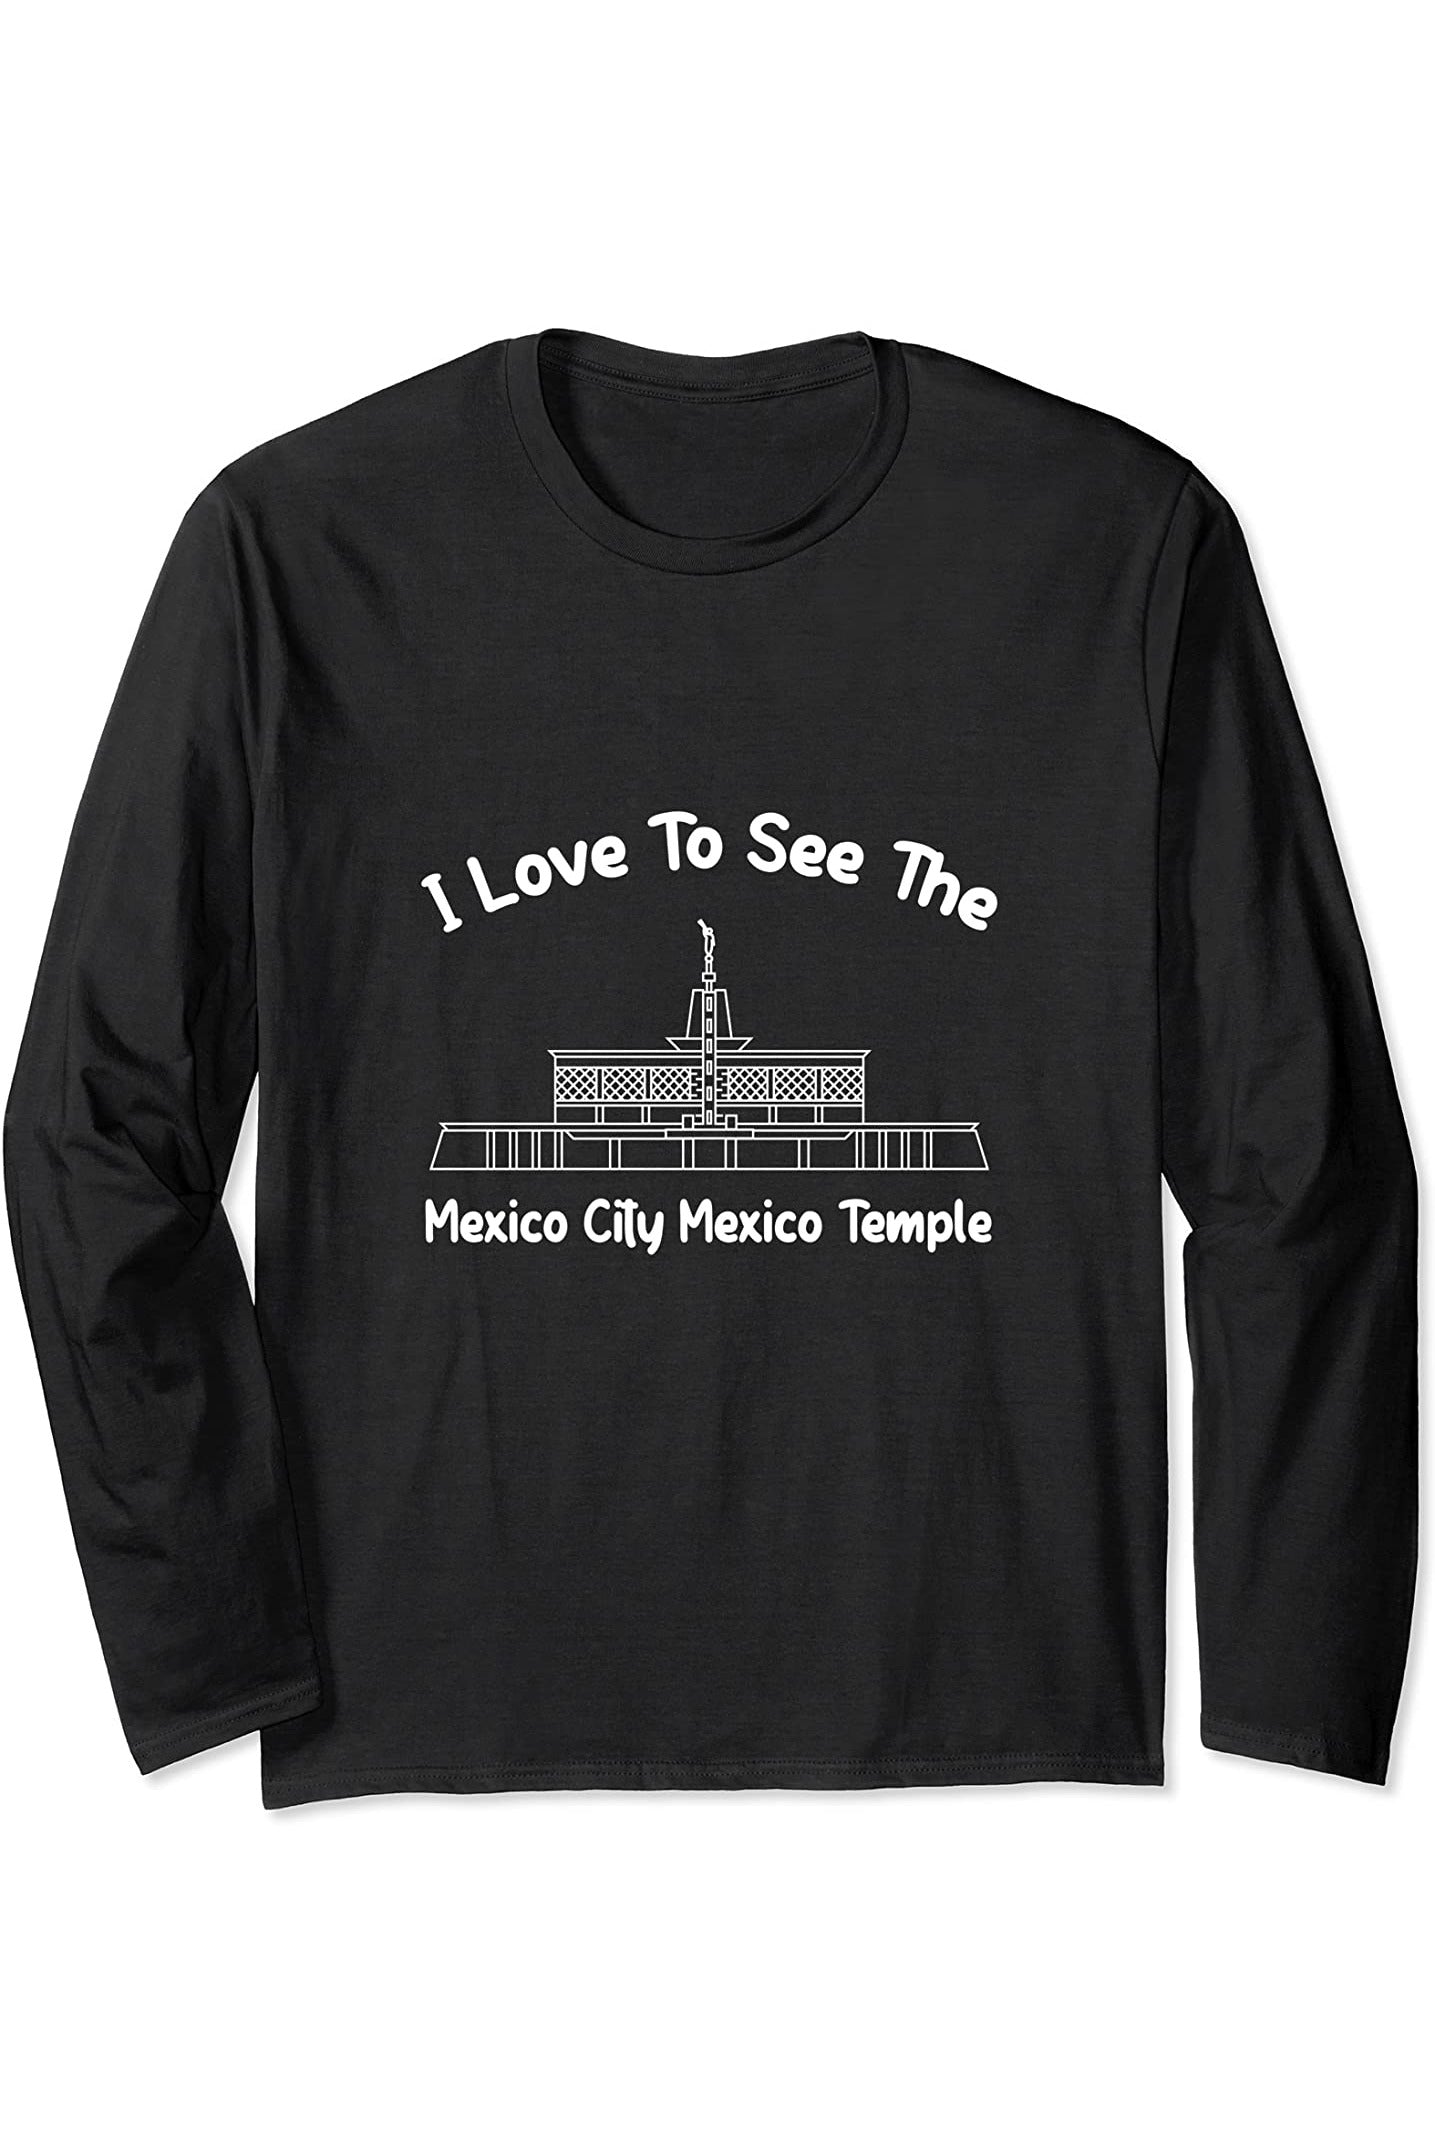 Mexico City Mexico Temple Long Sleeve T-Shirt - Primary Style (English) US